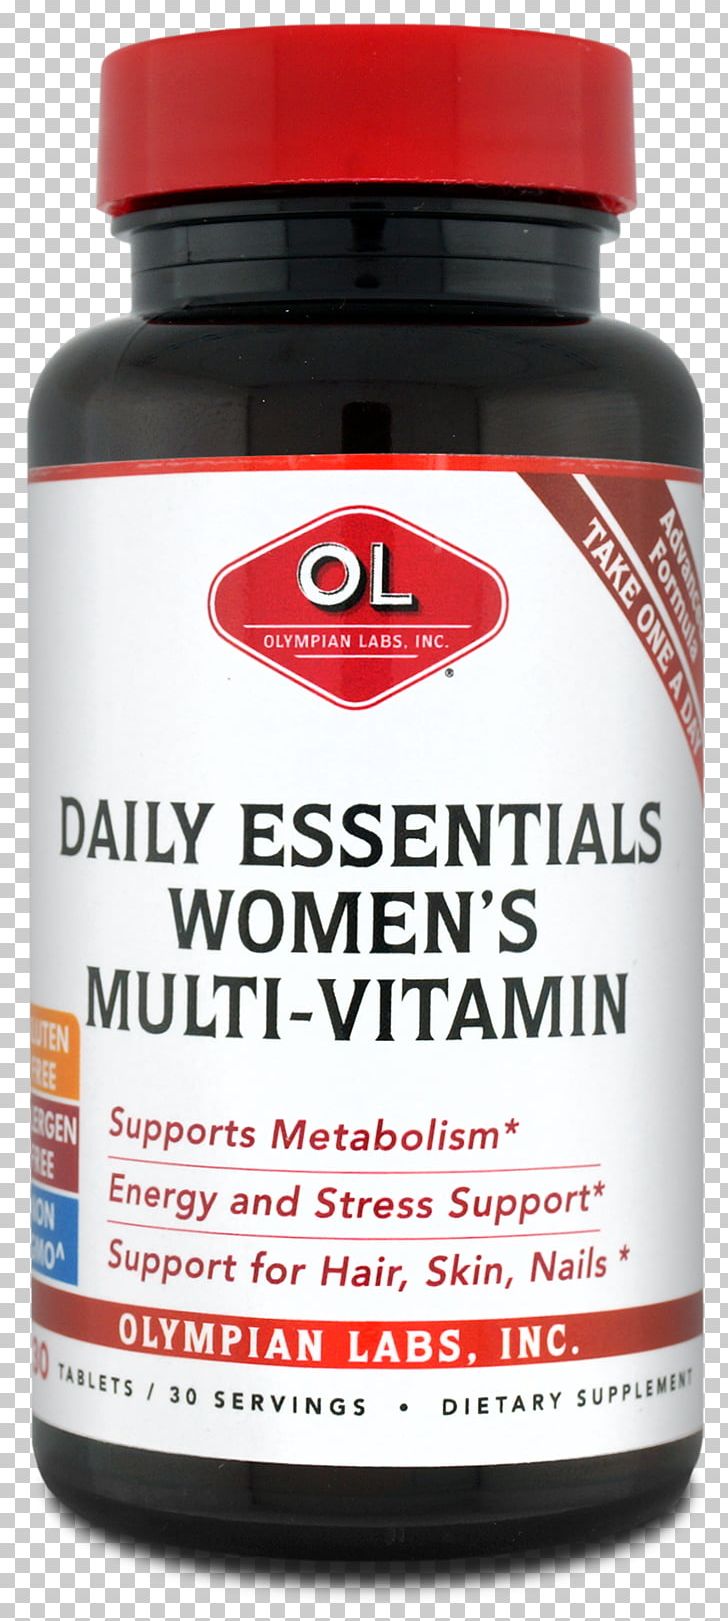 Dietary Supplement Olympian Labs Inc. Daily Essentials Women's Multi-Vitamin Flavor By Bob Holmes PNG, Clipart, Diet, Dietary Supplement, Flavor, Tablet Free PNG Download